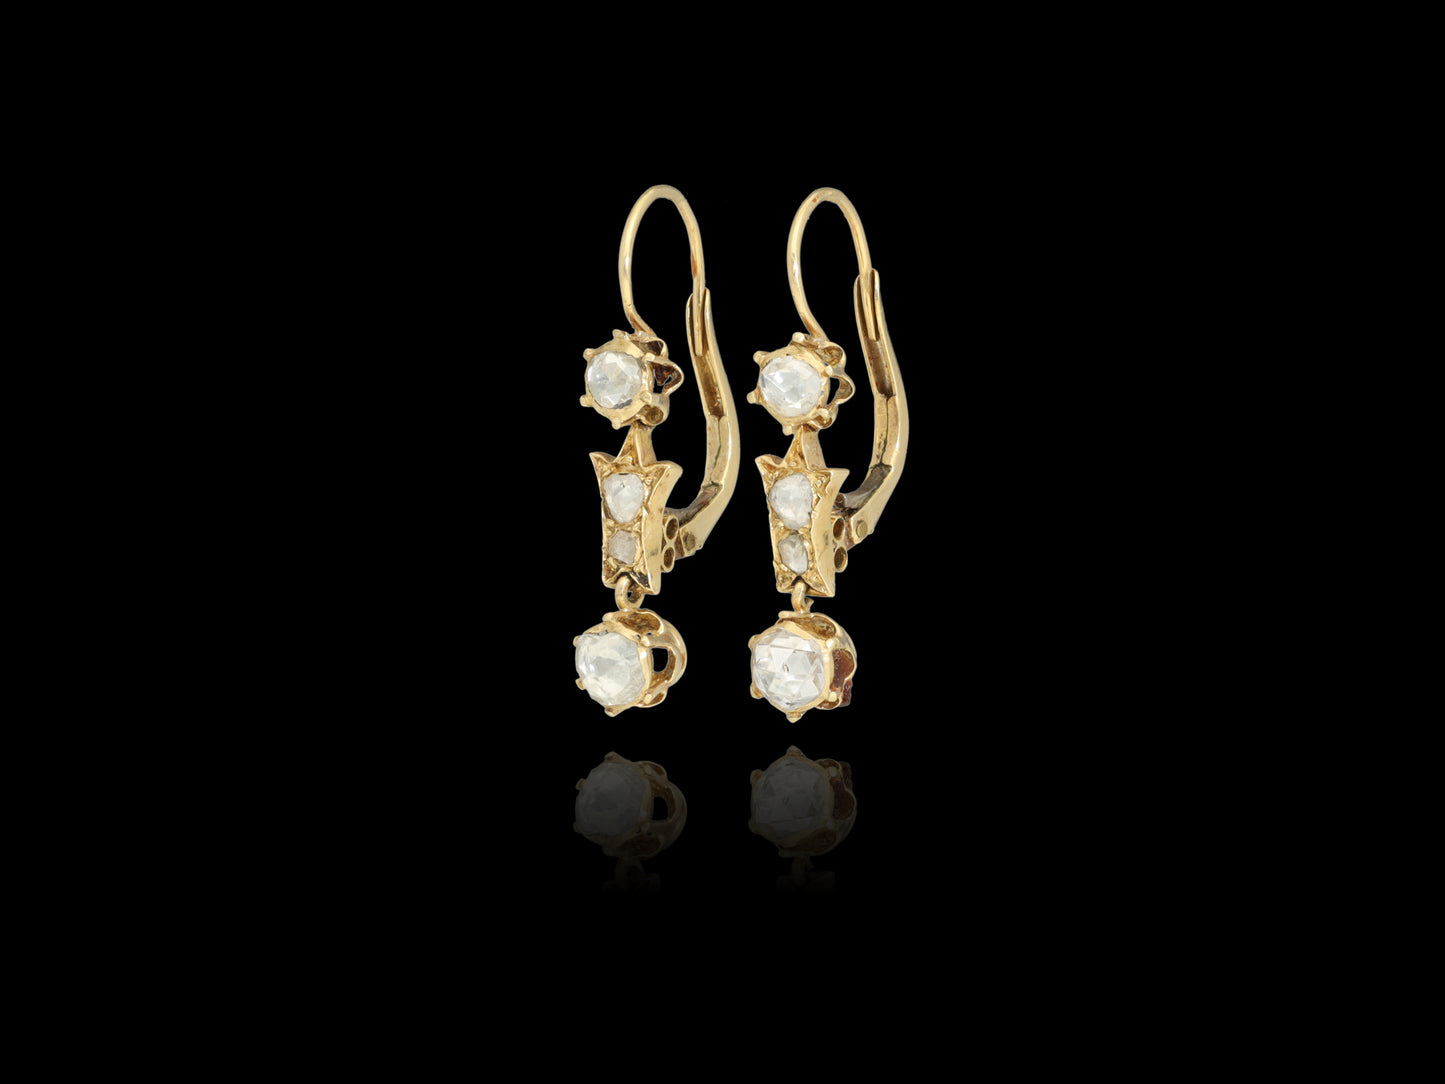 A classy and very feminine antique Victorian era pair of solid gold earrings! Made of solid 14 kt gold these earrings date back to mid-late 19th century and weight 4.3 grams.  The earrings are preserved in a superb condition.